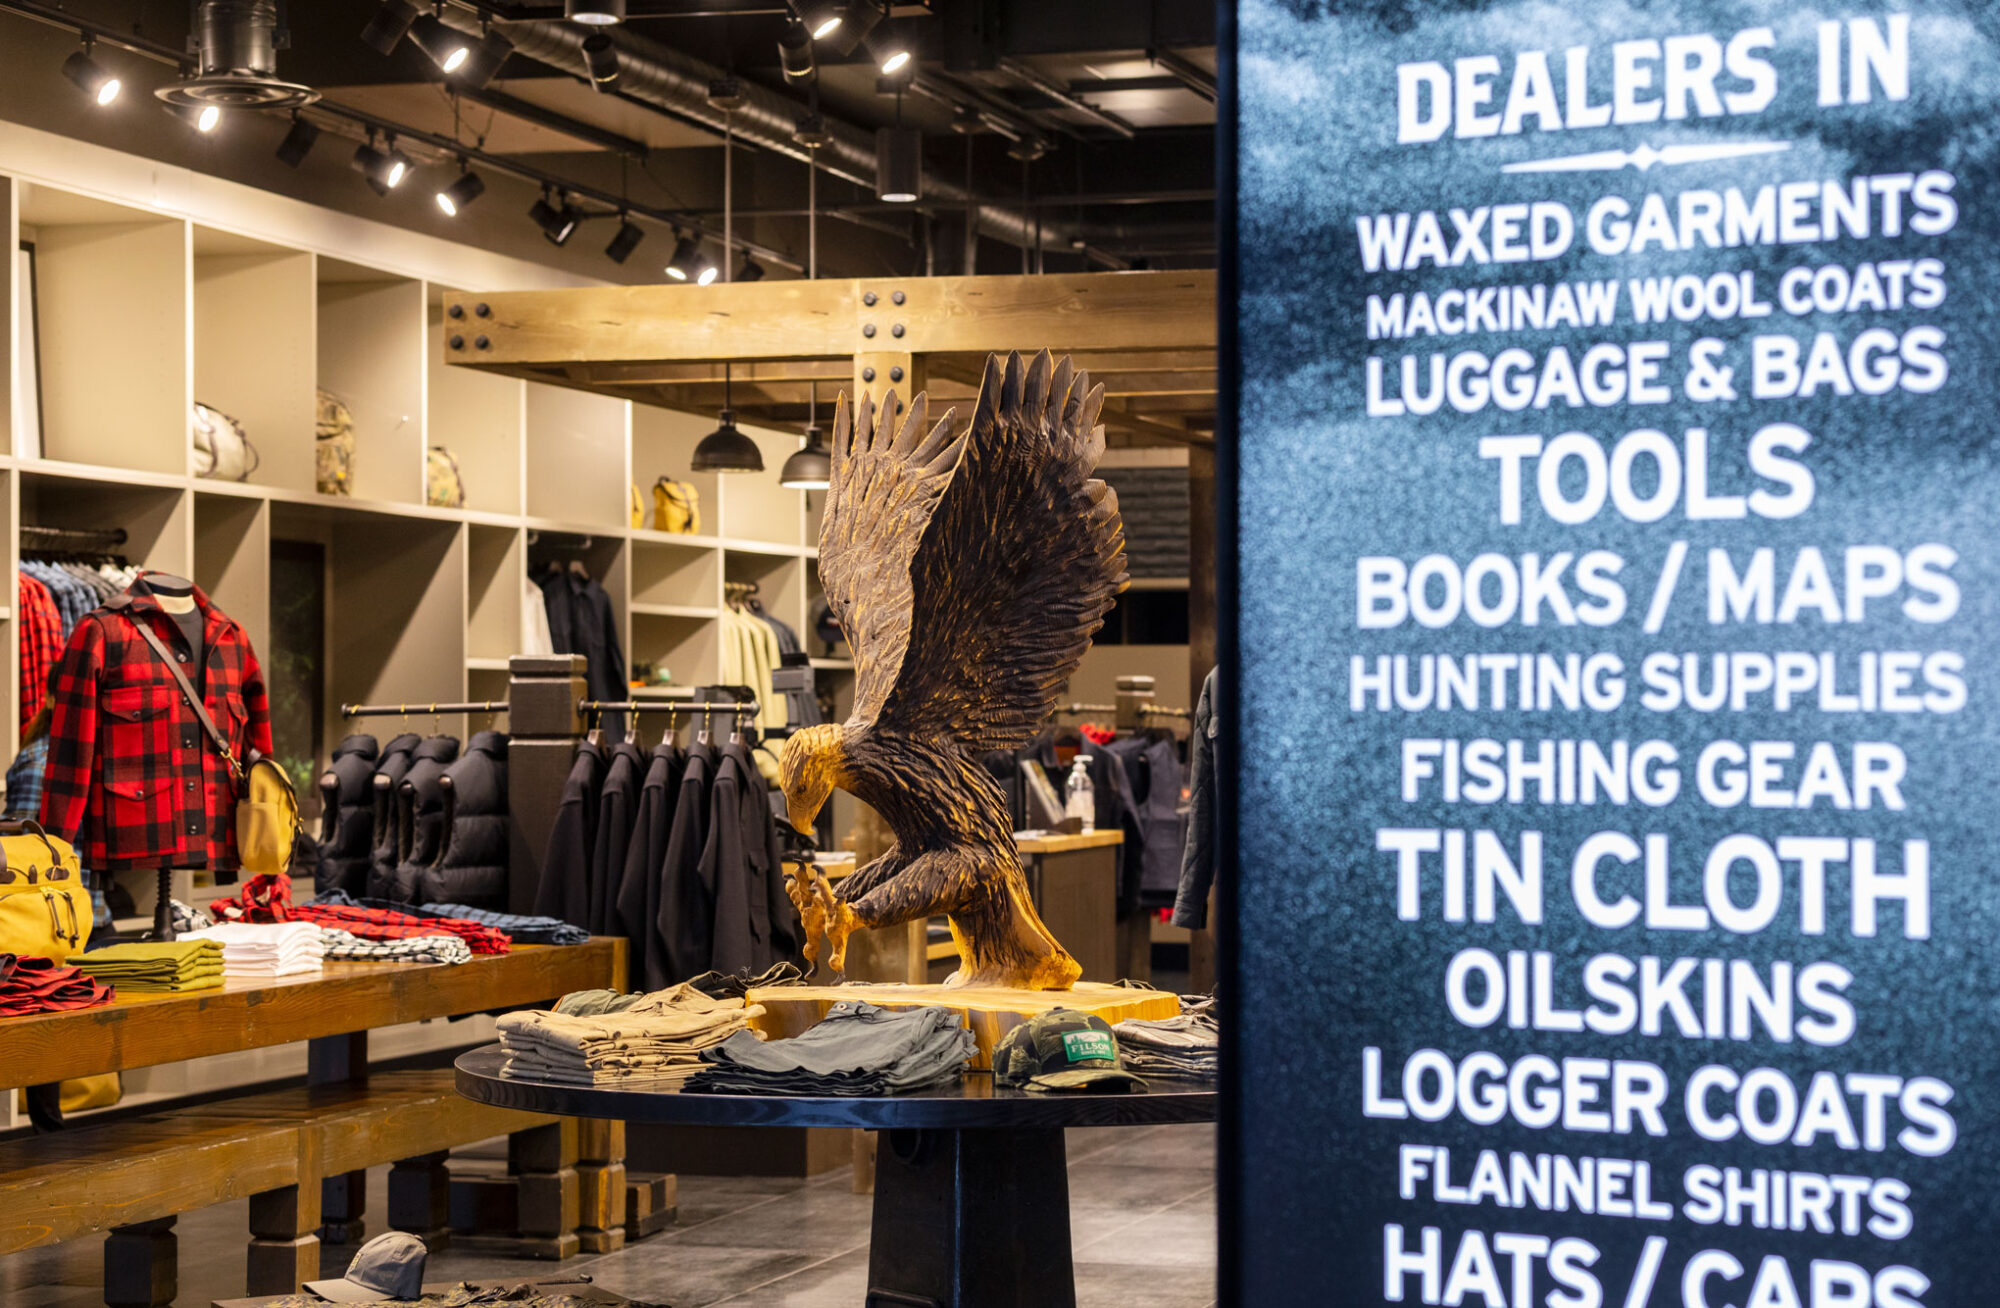 Filson interior view with signage and eagle sculpture